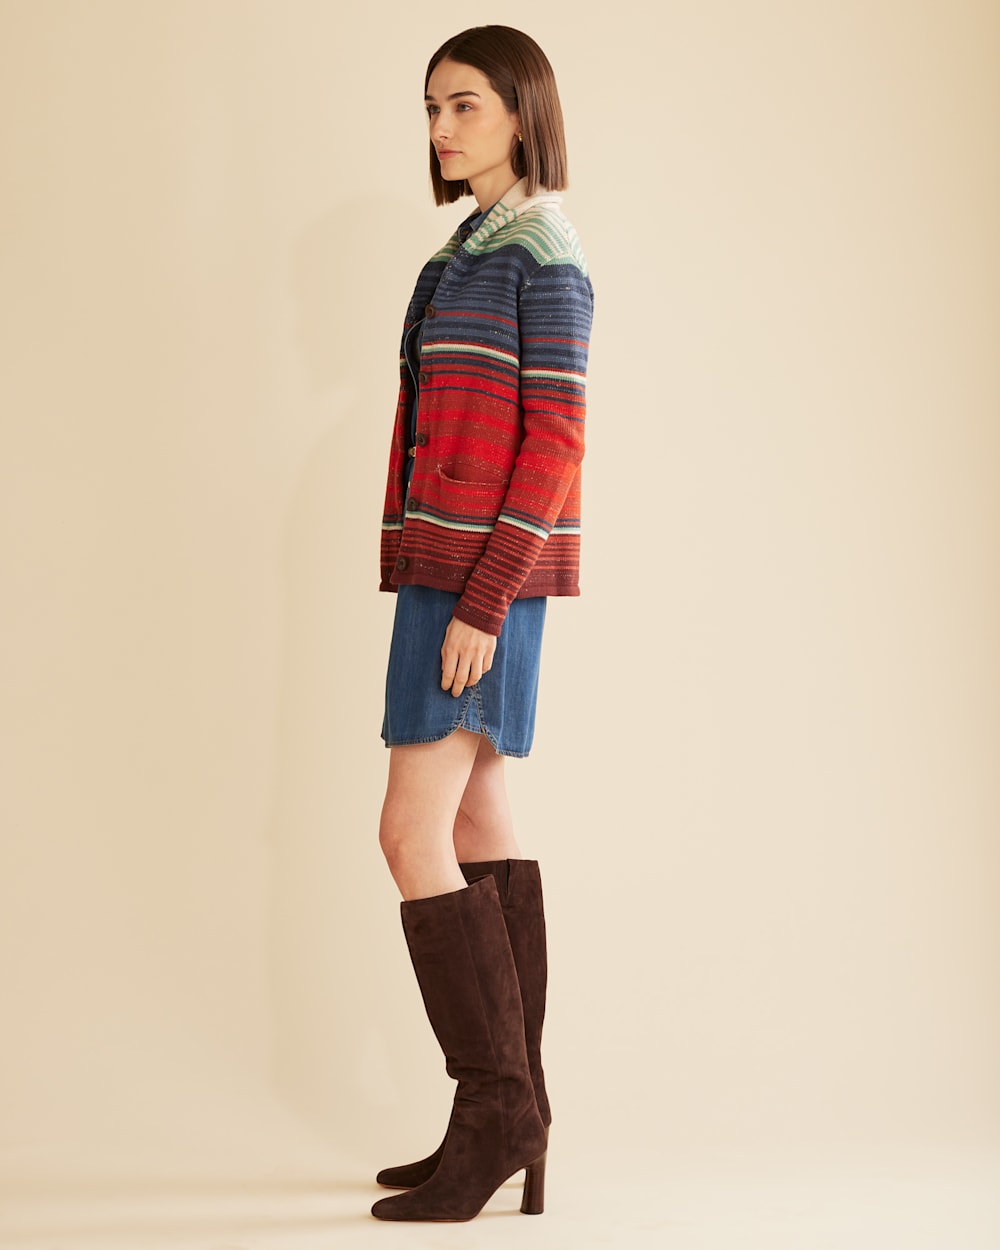 ALTERNATE VIEW OF WOMEN'S LONE PINE COTTON CAMP CARDIGAN IN RED OCHRE/INDIGO MULTI image number 2